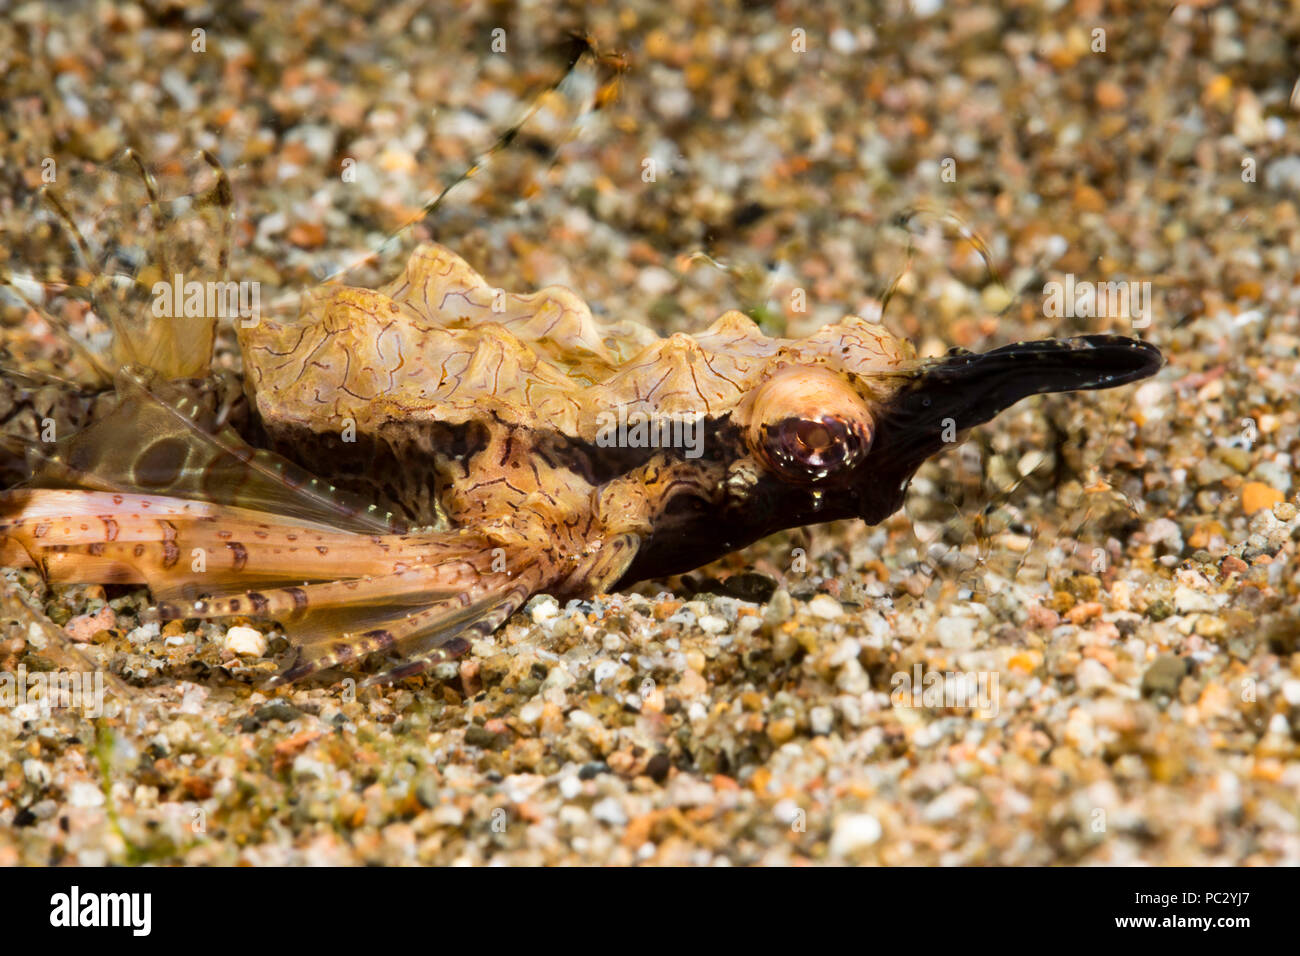 This is a close-up of a short dragonfish or Pegasus sea moth, Eurypegasus draconis. It is just a few inches long. The blurry lines in the water backgr Stock Photo